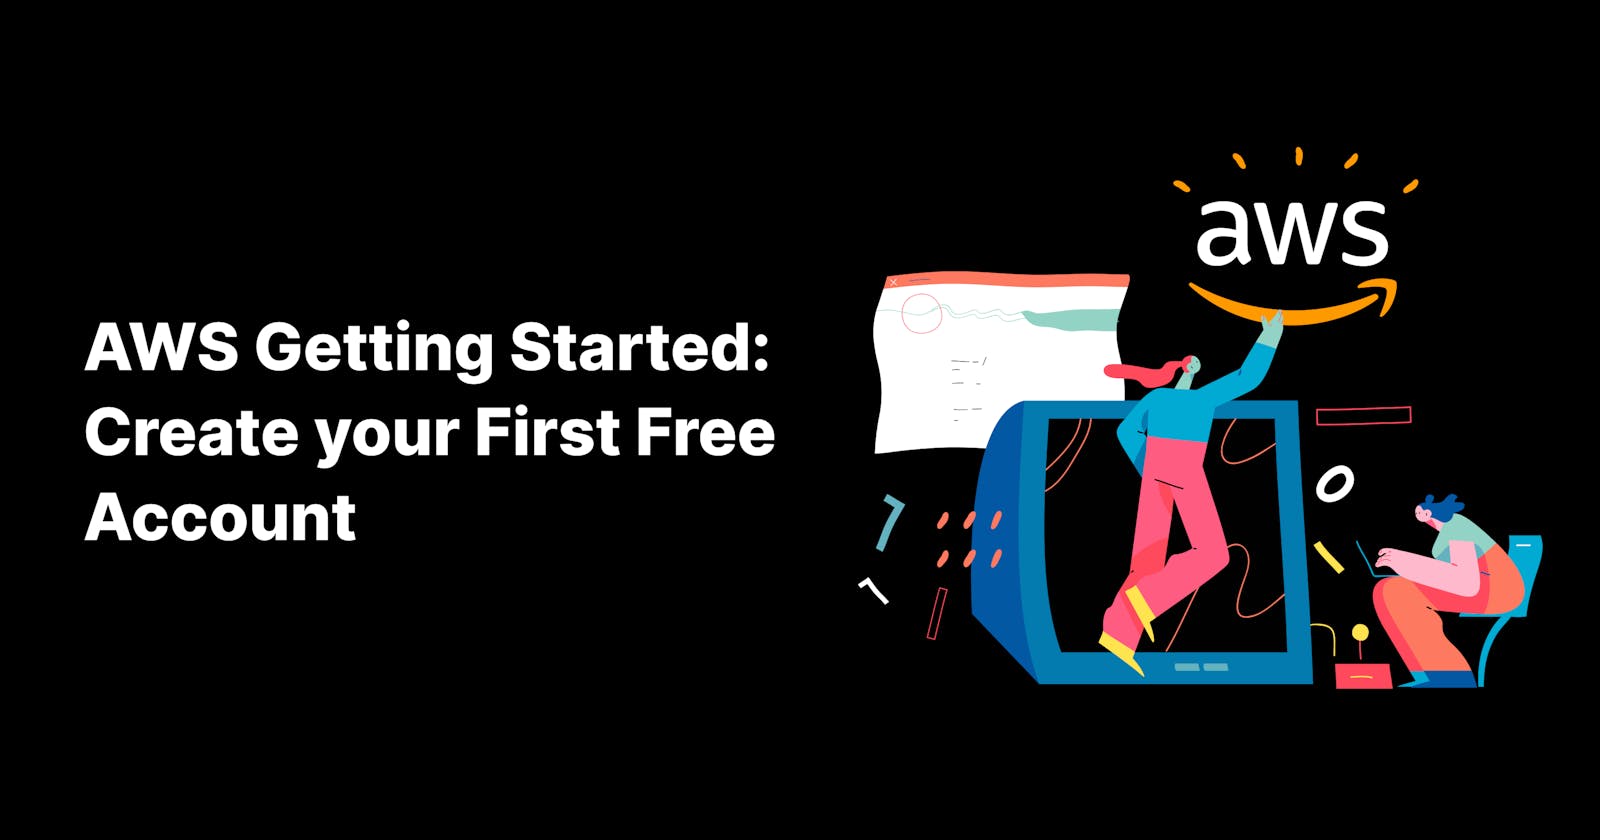 AWS Getting Started - Create Your First Free Account